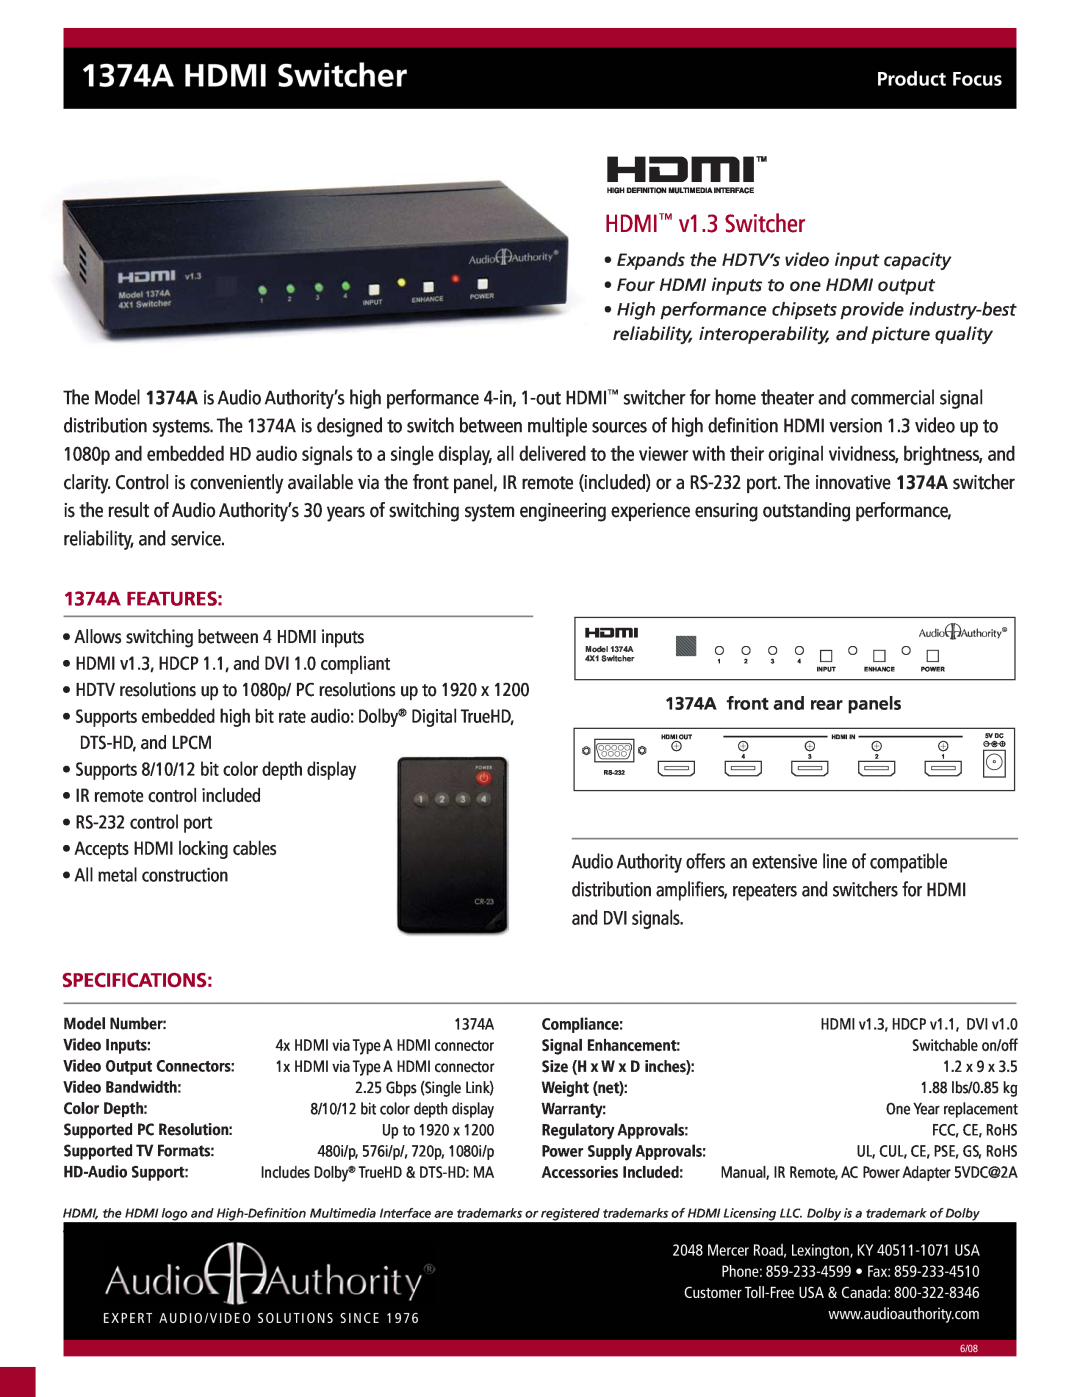 Audio Authority specifications 1374A HDMI Switcher, HDMI v1.3 Switcher, Product Focus, 1374A FEATURES, Specifications 